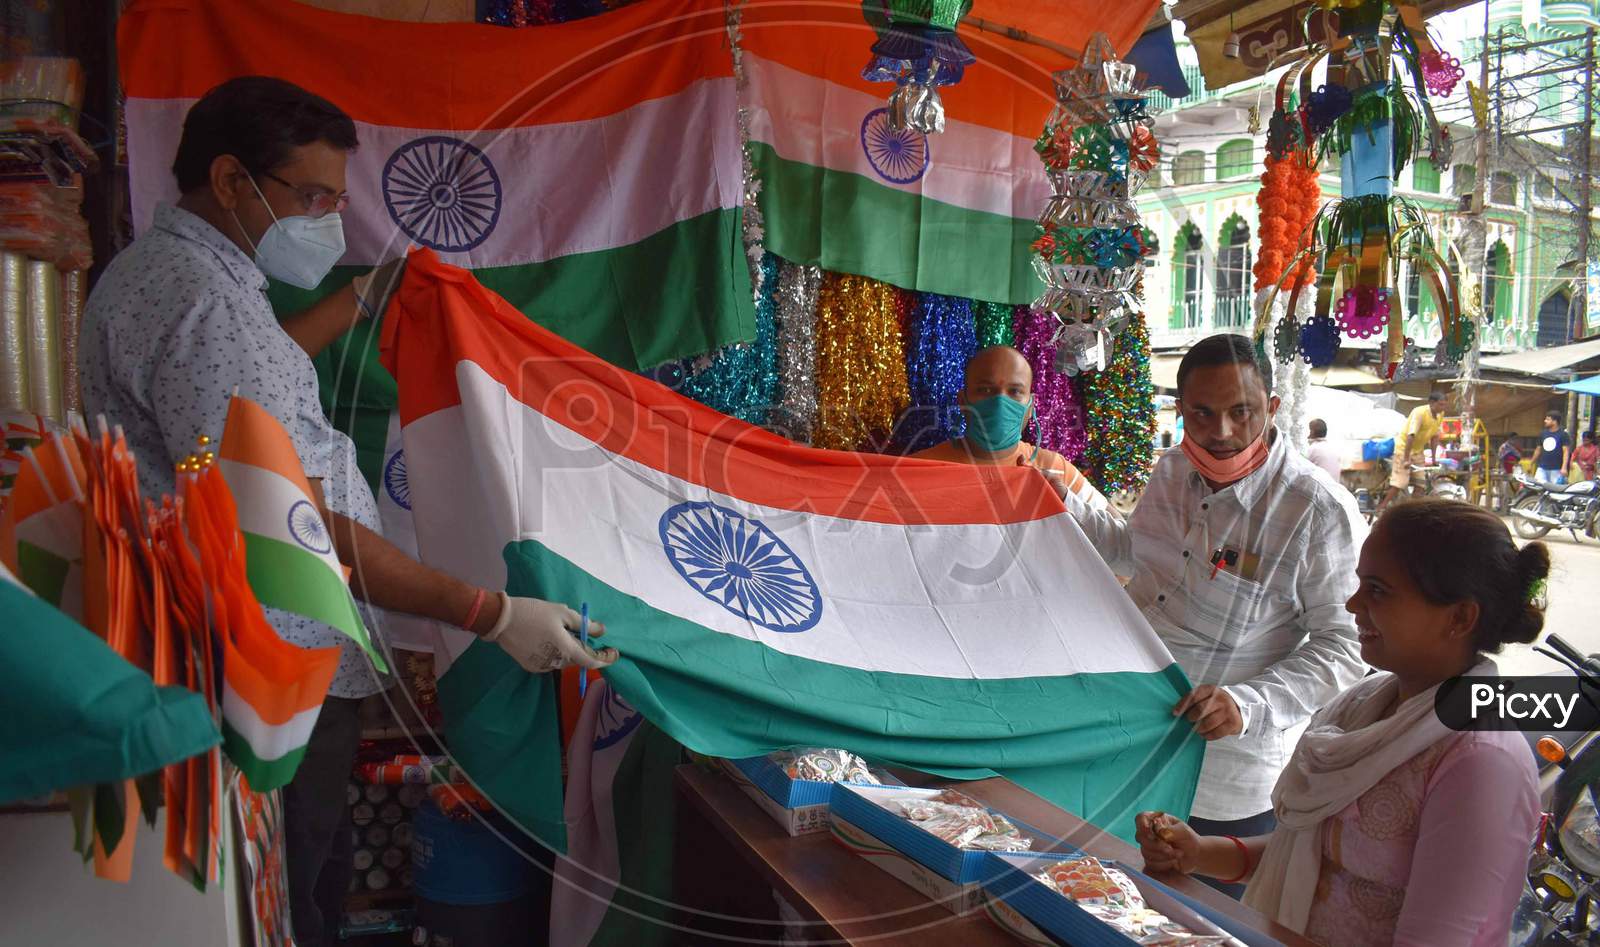 People purchasing tri colored national flags ahead of Independence day celebrations in Prayagraj, August 14, 2020